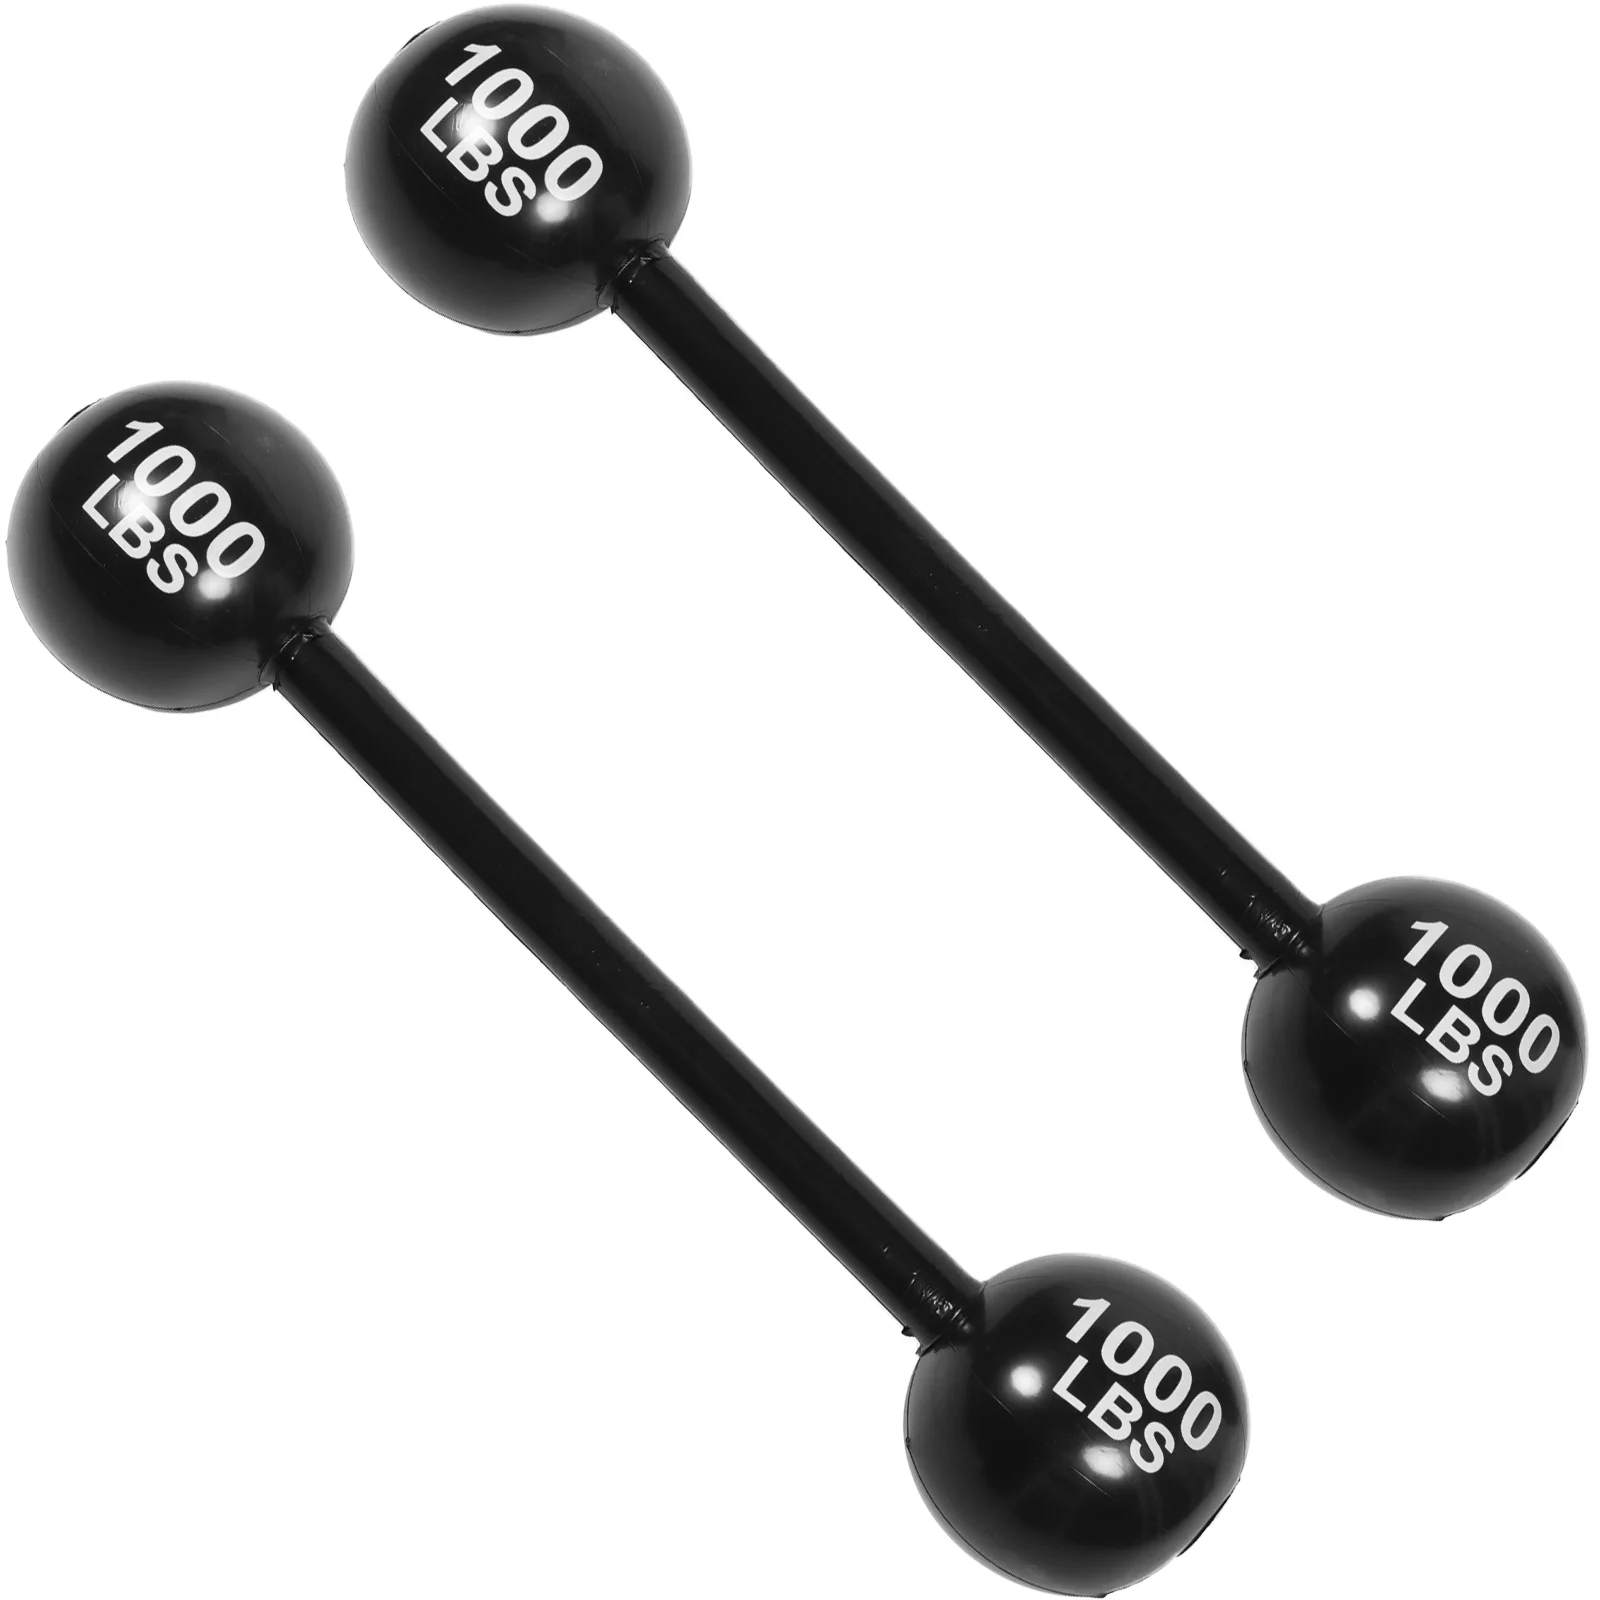 2PCS Barbell Dumbbell Strongman Costume Toys Carnival Circus Photo Prop Decoration Weights for Kids Adults Fancy Dress